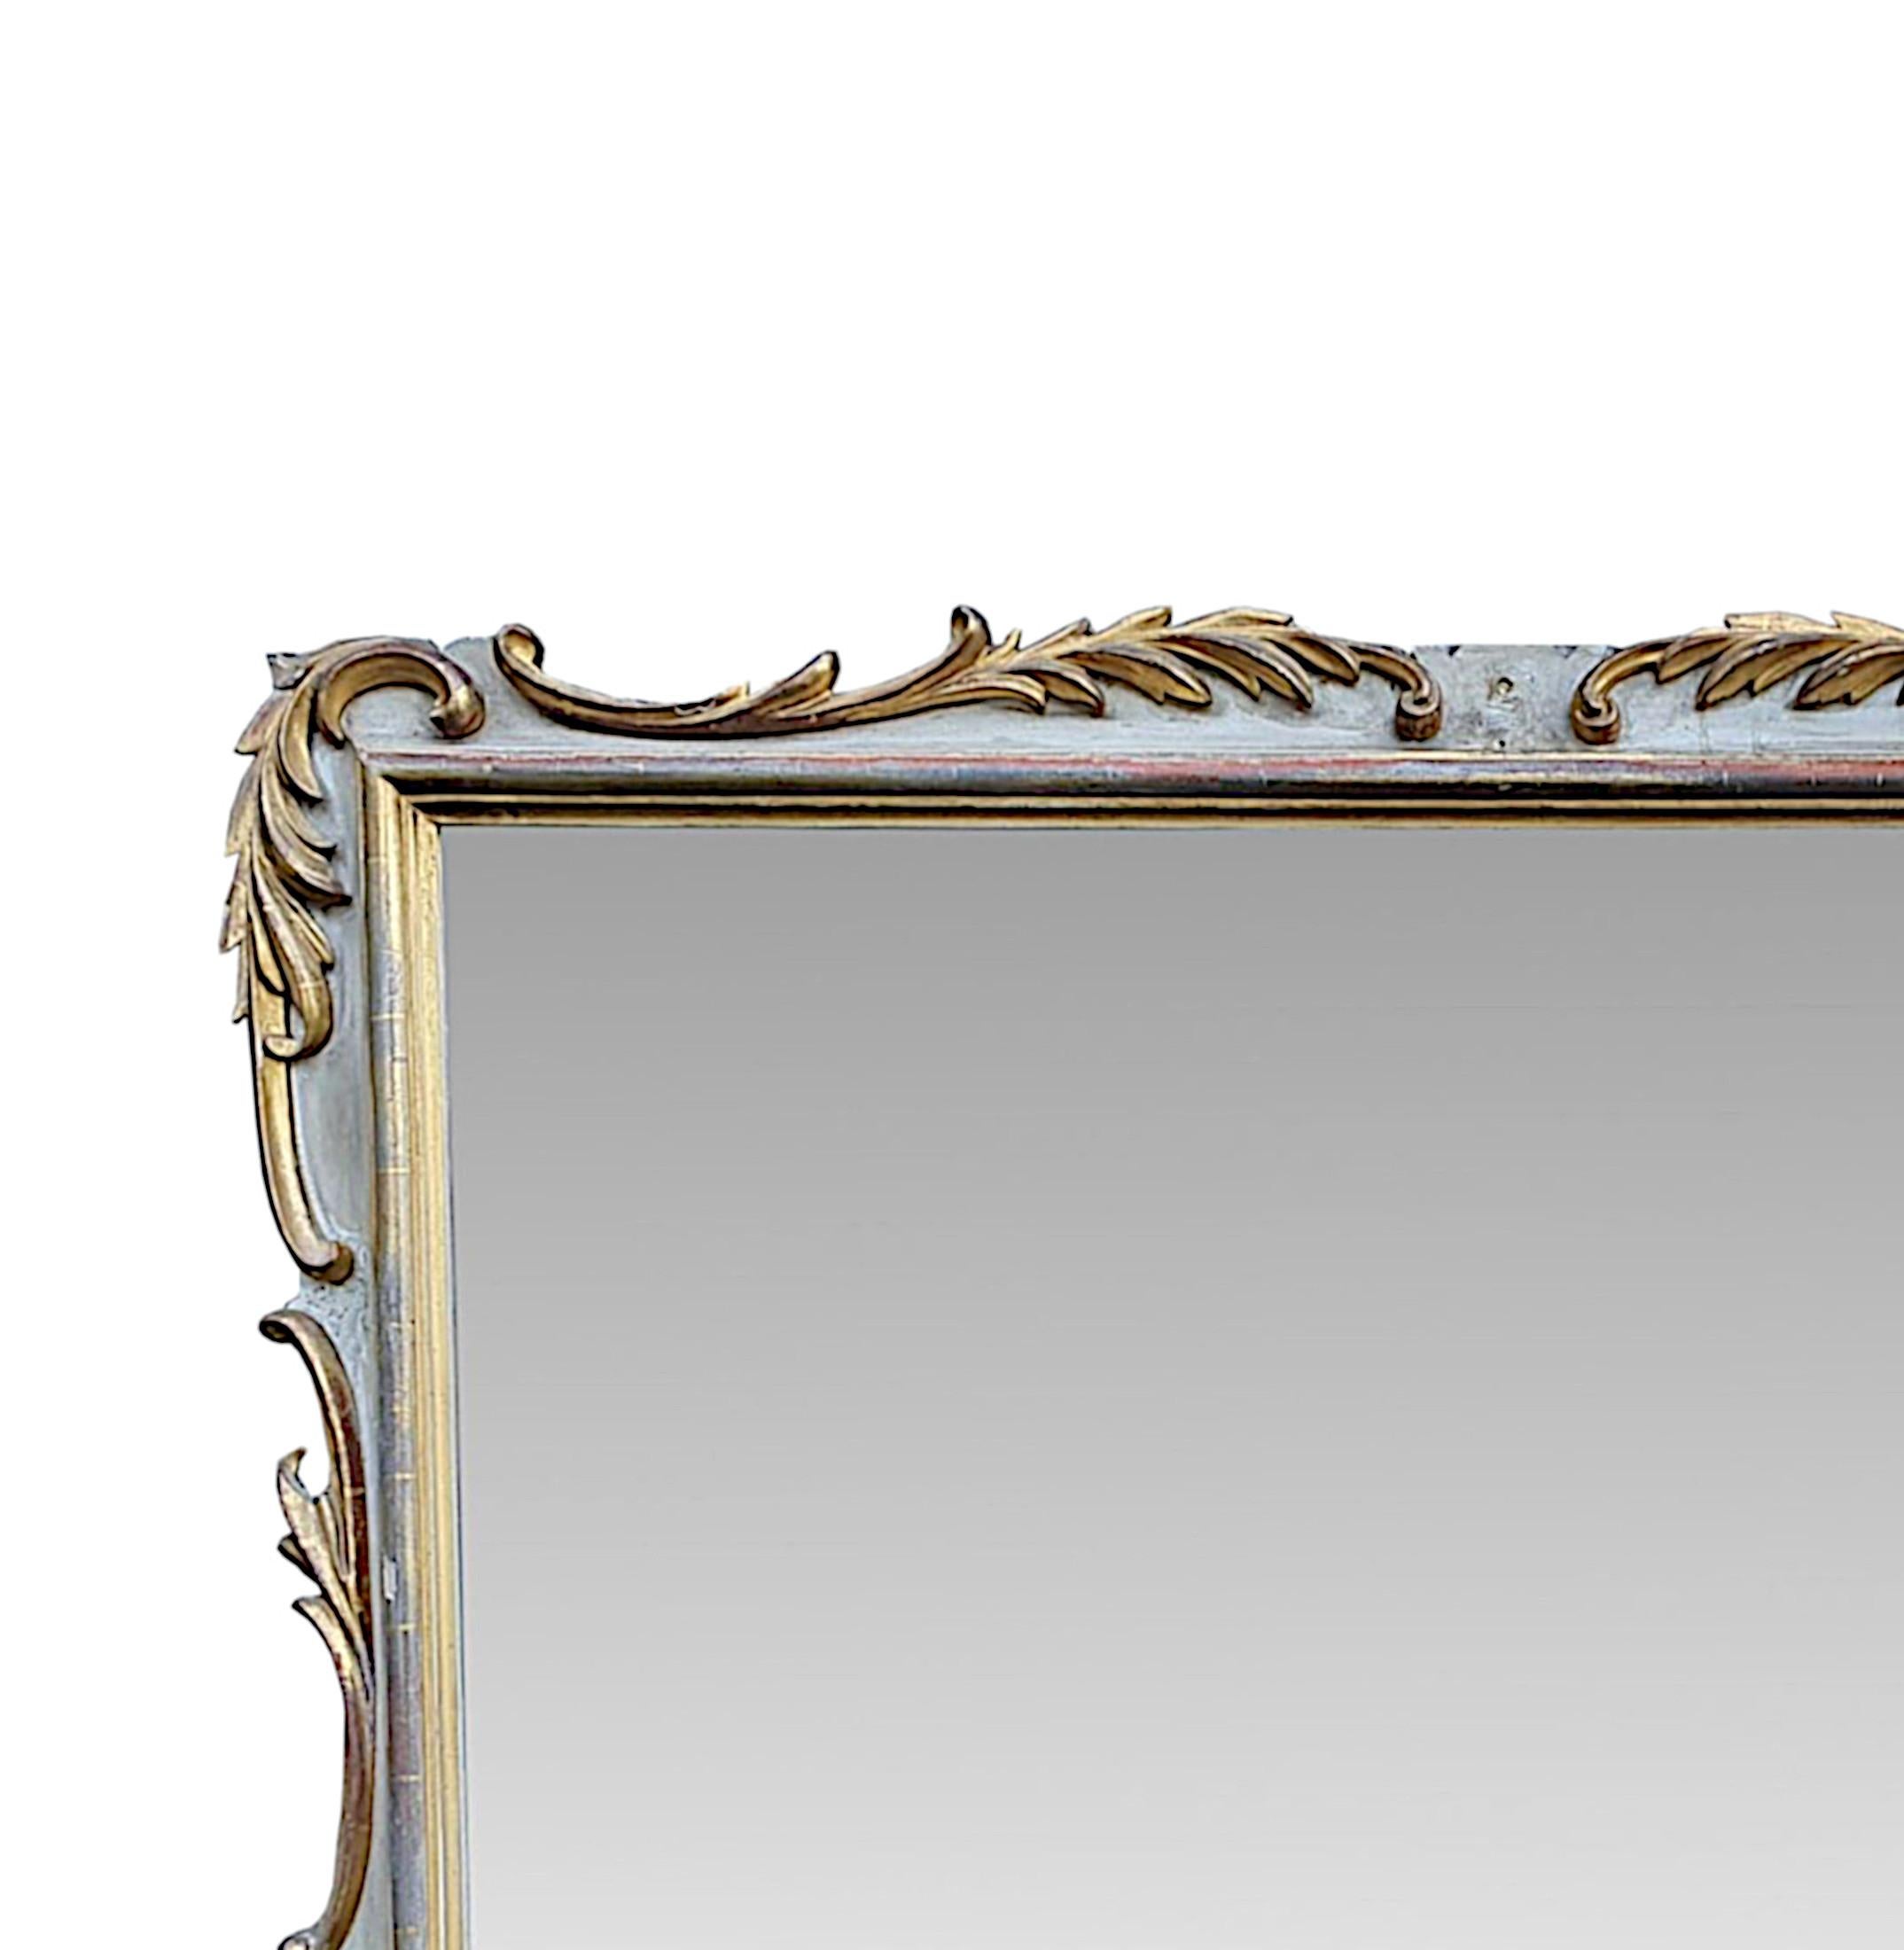 A very fine early 19th century Regency parcel gilt overmantle mirror of rectangular form in original condition. The slightly distressed, mercury mirror glass plate is set within a beautifully hand carved, moulded frame with gorgeous trailing